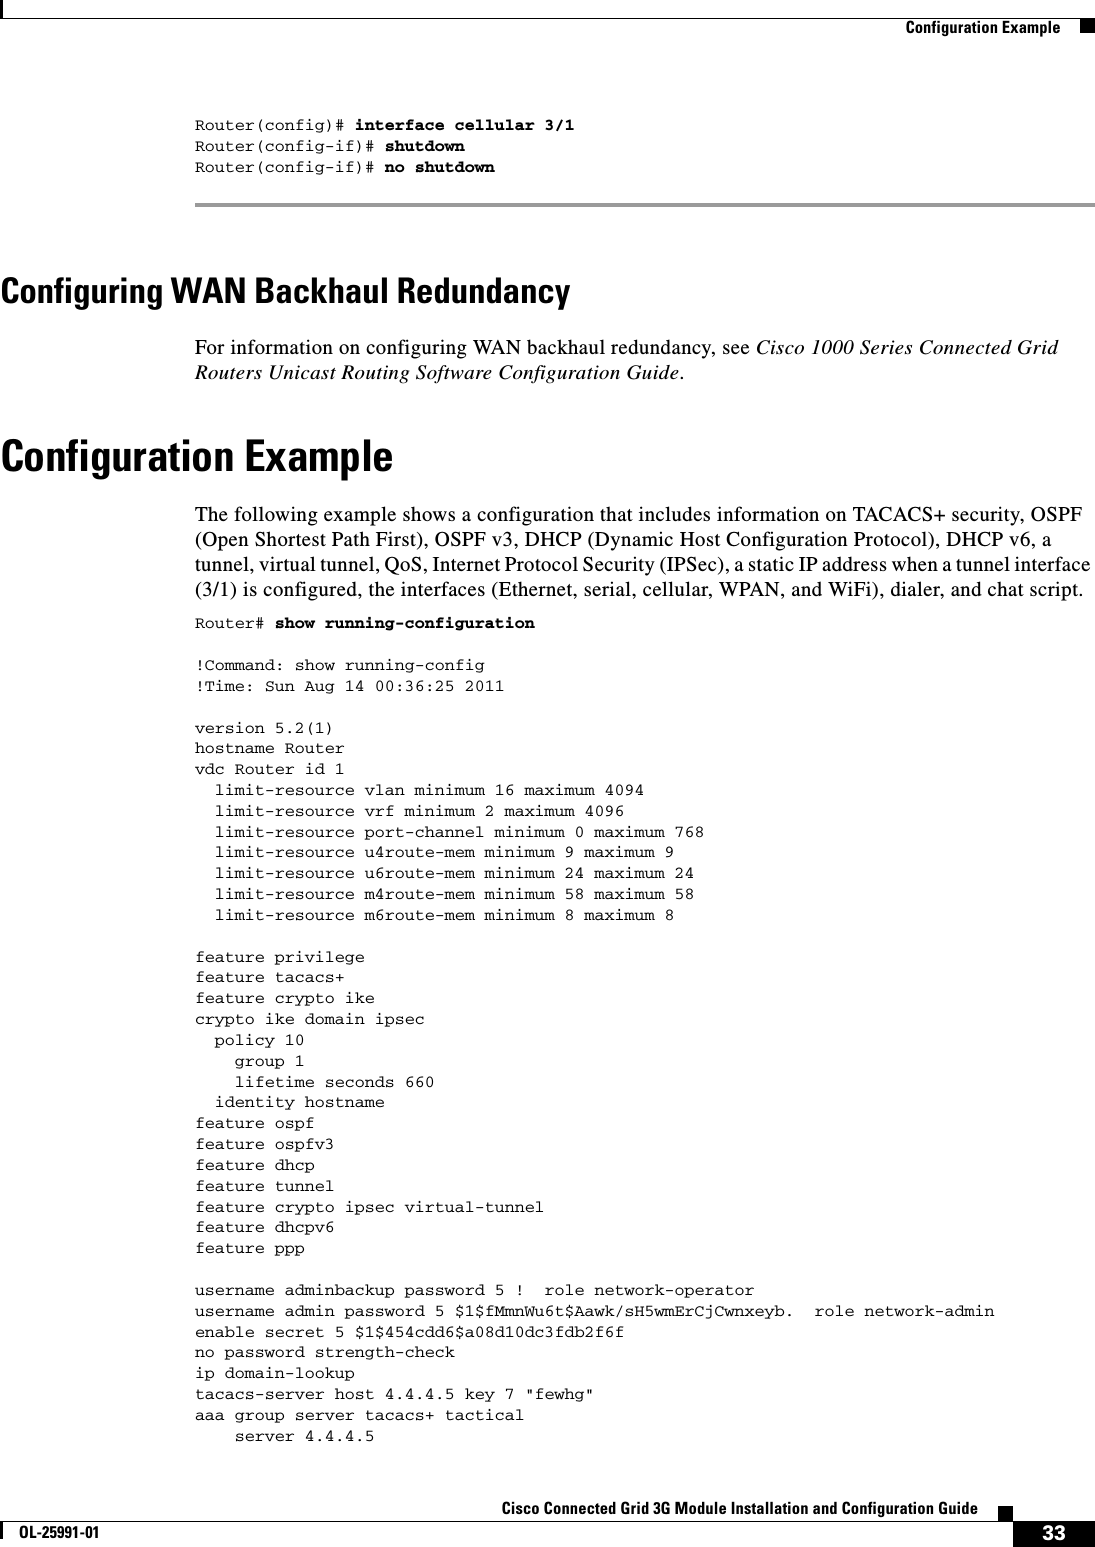 33Cisco Connected Grid 3G Module Installation and Configuration GuideOL-25991-01  Configuration ExampleRouter(config)# interface cellular 3/1Router(config-if)# shutdownRouter(config-if)# no shutdown Configuring WAN Backhaul RedundancyFor information on configuring WAN backhaul redundancy, see Cisco 1000 Series Connected Grid Routers Unicast Routing Software Configuration Guide.Configuration ExampleThe following example shows a configuration that includes information on TACACS+ security, OSPF (Open Shortest Path First), OSPF v3, DHCP (Dynamic Host Configuration Protocol), DHCP v6, a tunnel, virtual tunnel, QoS, Internet Protocol Security (IPSec), a static IP address when a tunnel interface (3/1) is configured, the interfaces (Ethernet, serial, cellular, WPAN, and WiFi), dialer, and chat script.Router# show running-configuration !Command: show running-config!Time: Sun Aug 14 00:36:25 2011version 5.2(1)hostname Routervdc Router id 1  limit-resource vlan minimum 16 maximum 4094  limit-resource vrf minimum 2 maximum 4096  limit-resource port-channel minimum 0 maximum 768  limit-resource u4route-mem minimum 9 maximum 9  limit-resource u6route-mem minimum 24 maximum 24  limit-resource m4route-mem minimum 58 maximum 58  limit-resource m6route-mem minimum 8 maximum 8feature privilegefeature tacacs+feature crypto ikecrypto ike domain ipsec  policy 10    group 1    lifetime seconds 660  identity hostnamefeature ospffeature ospfv3feature dhcpfeature tunnelfeature crypto ipsec virtual-tunnelfeature dhcpv6feature pppusername adminbackup password 5 !  role network-operatorusername admin password 5 $1$fMmnWu6t$Aawk/sH5wmErCjCwnxeyb.  role network-adminenable secret 5 $1$454cdd6$a08d10dc3fdb2f6fno password strength-checkip domain-lookuptacacs-server host 4.4.4.5 key 7 &quot;fewhg&quot; aaa group server tacacs+ tactical     server 4.4.4.5 